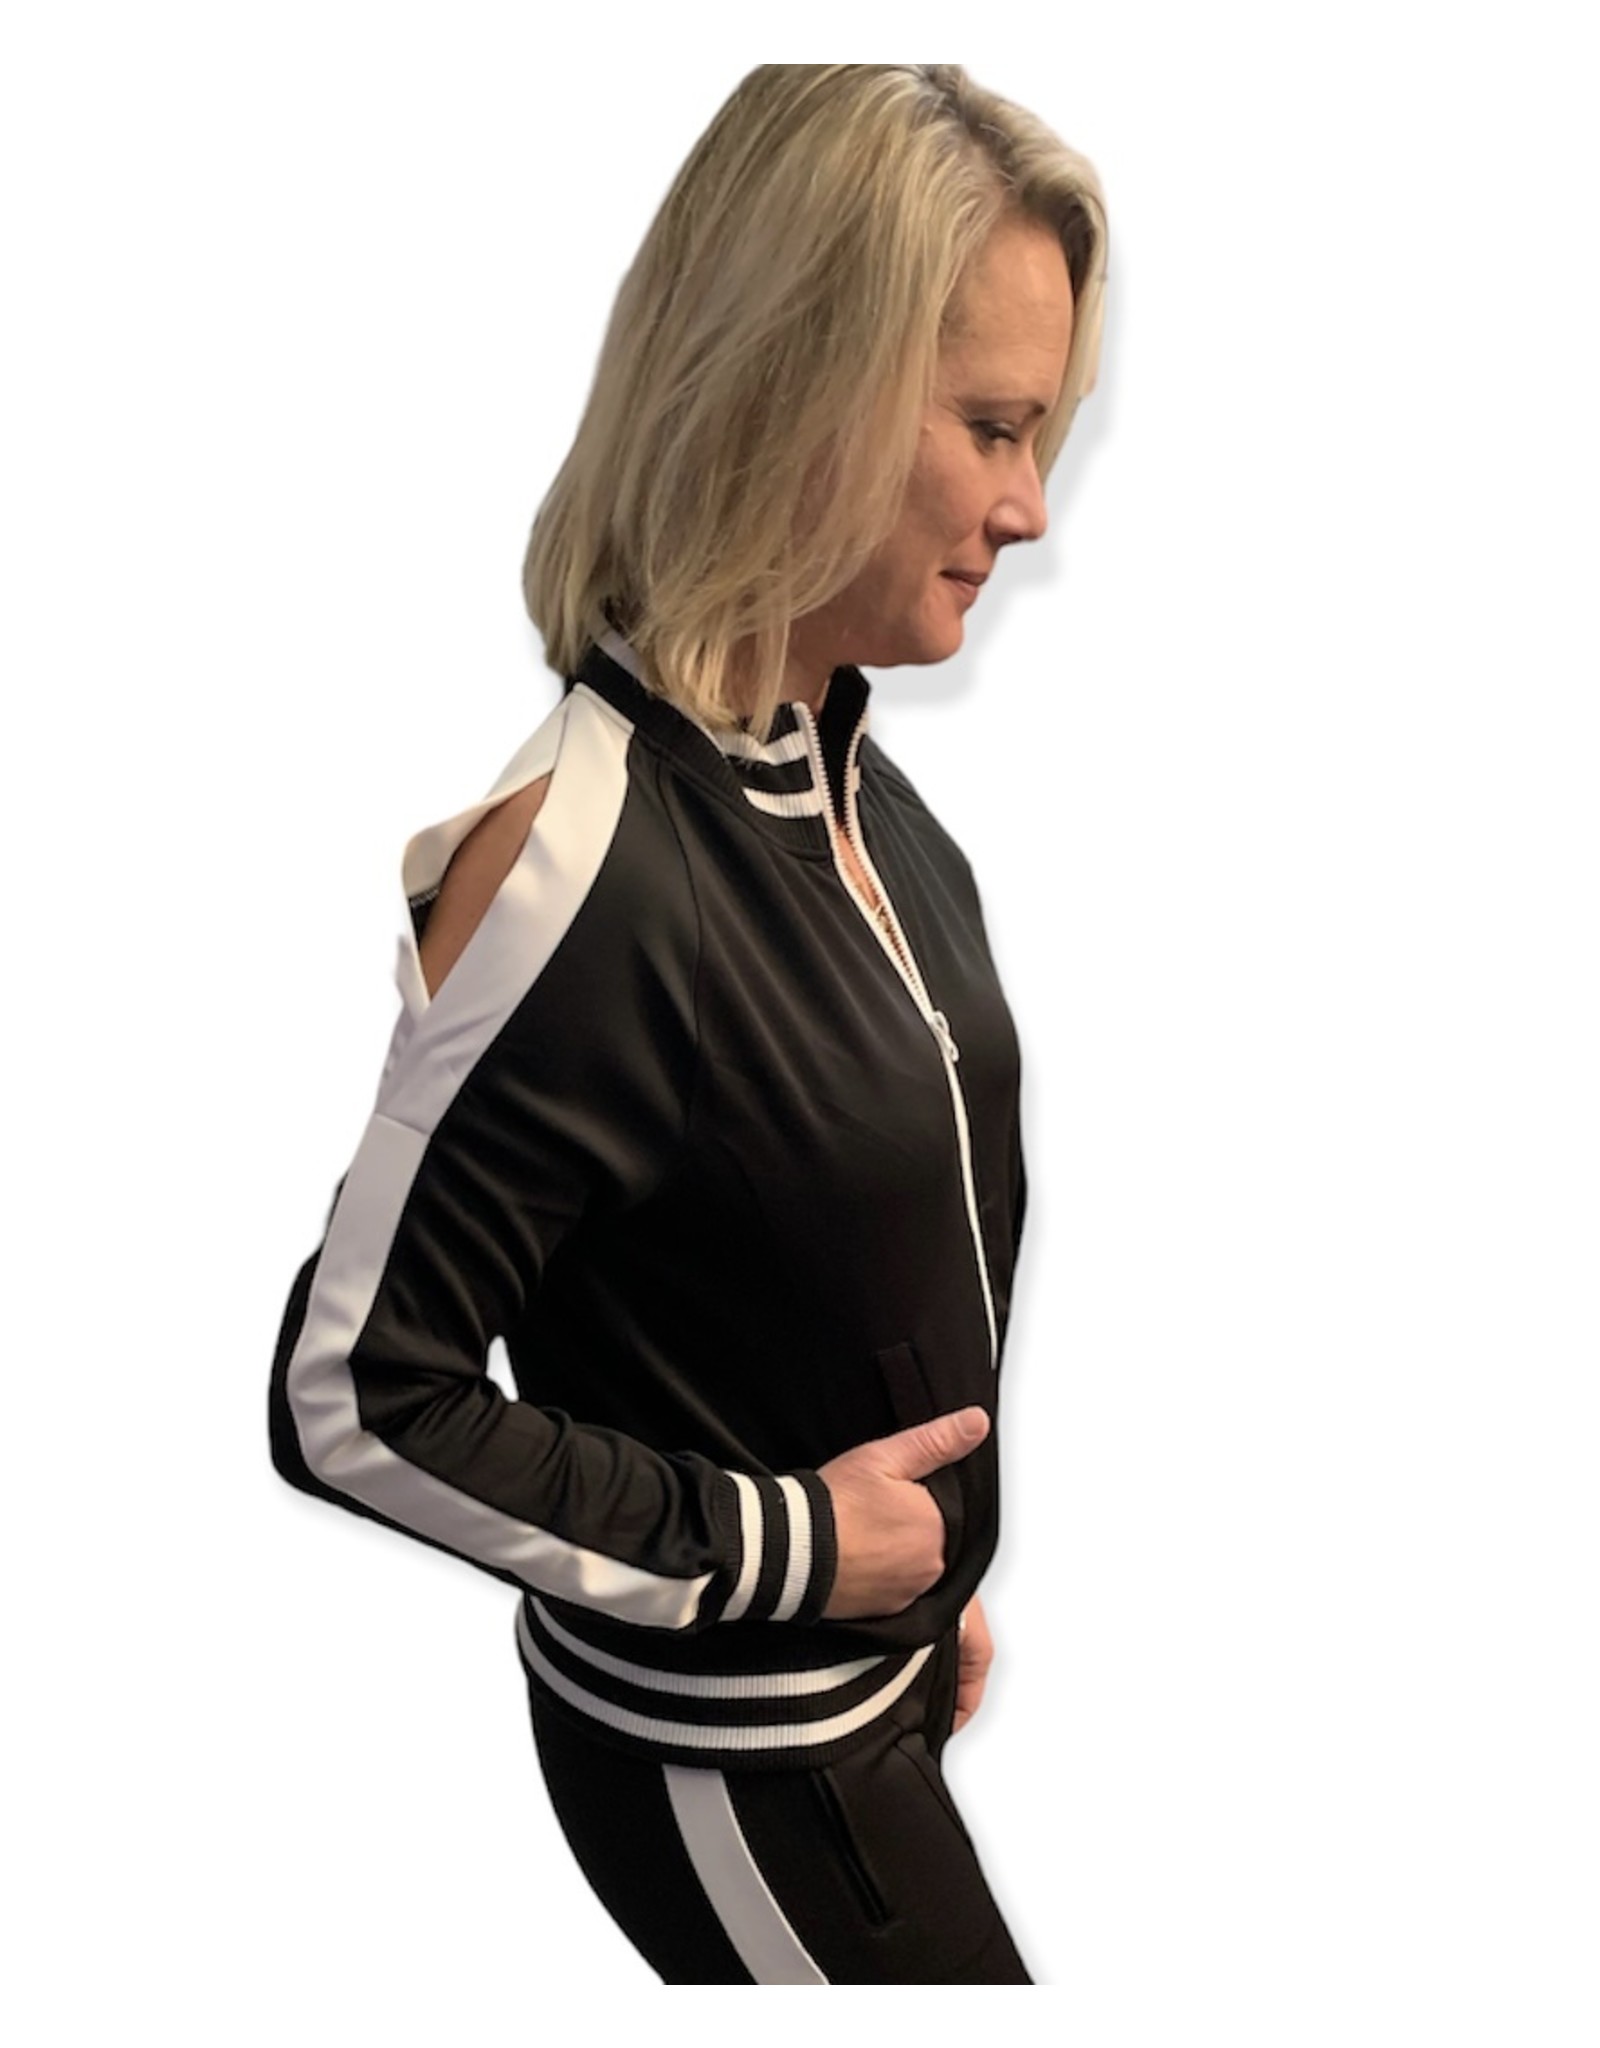 LATA On the Go B&W Jacket w/ Cold Shoulders